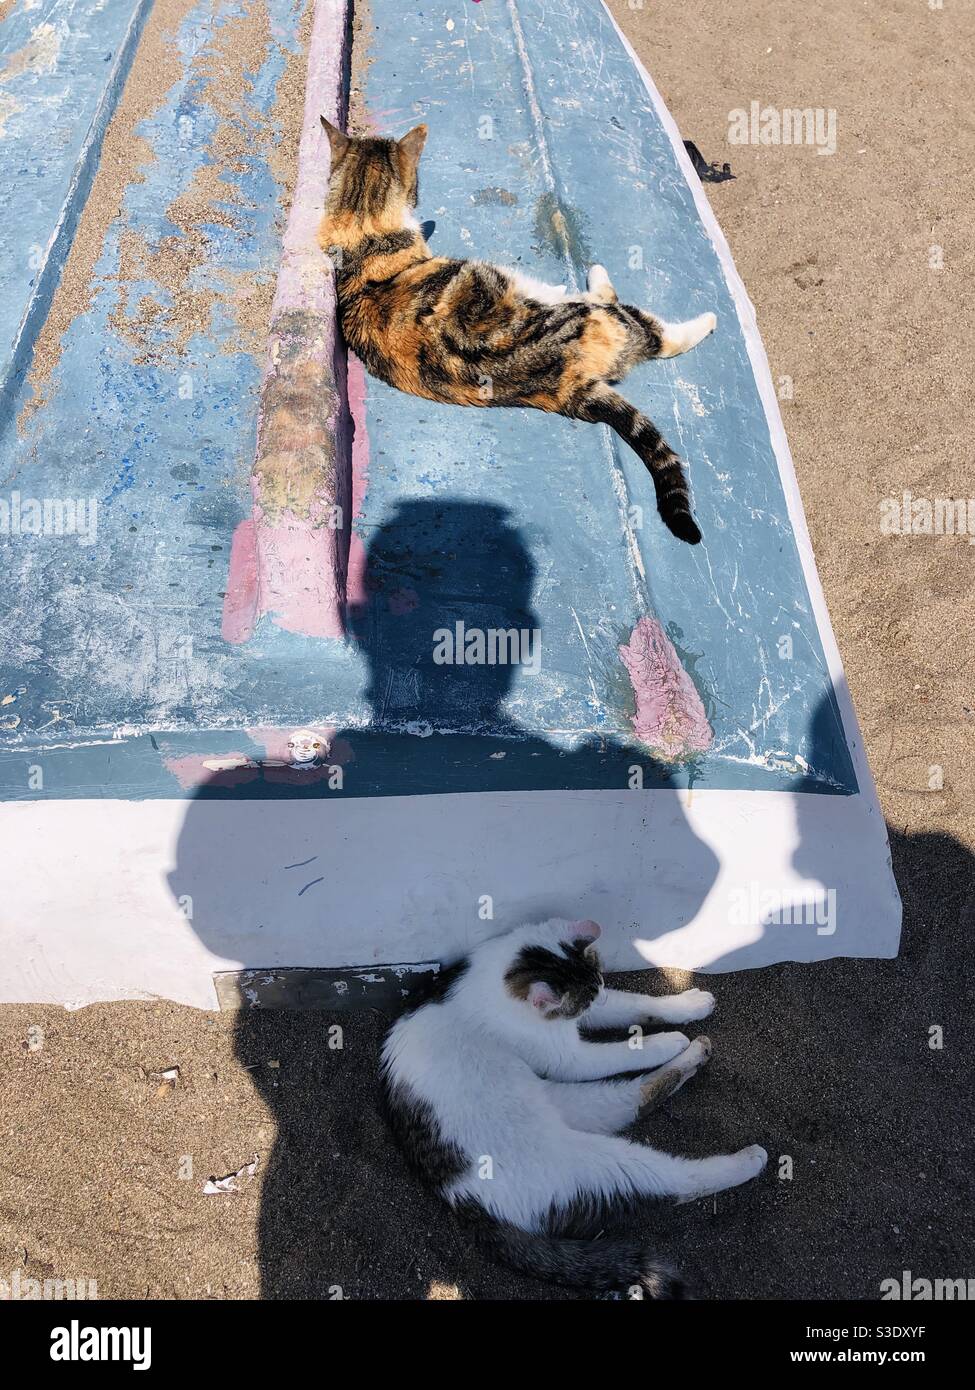 Street Cats resting on a flipped fishing boat and shadow of a person Stock Photo